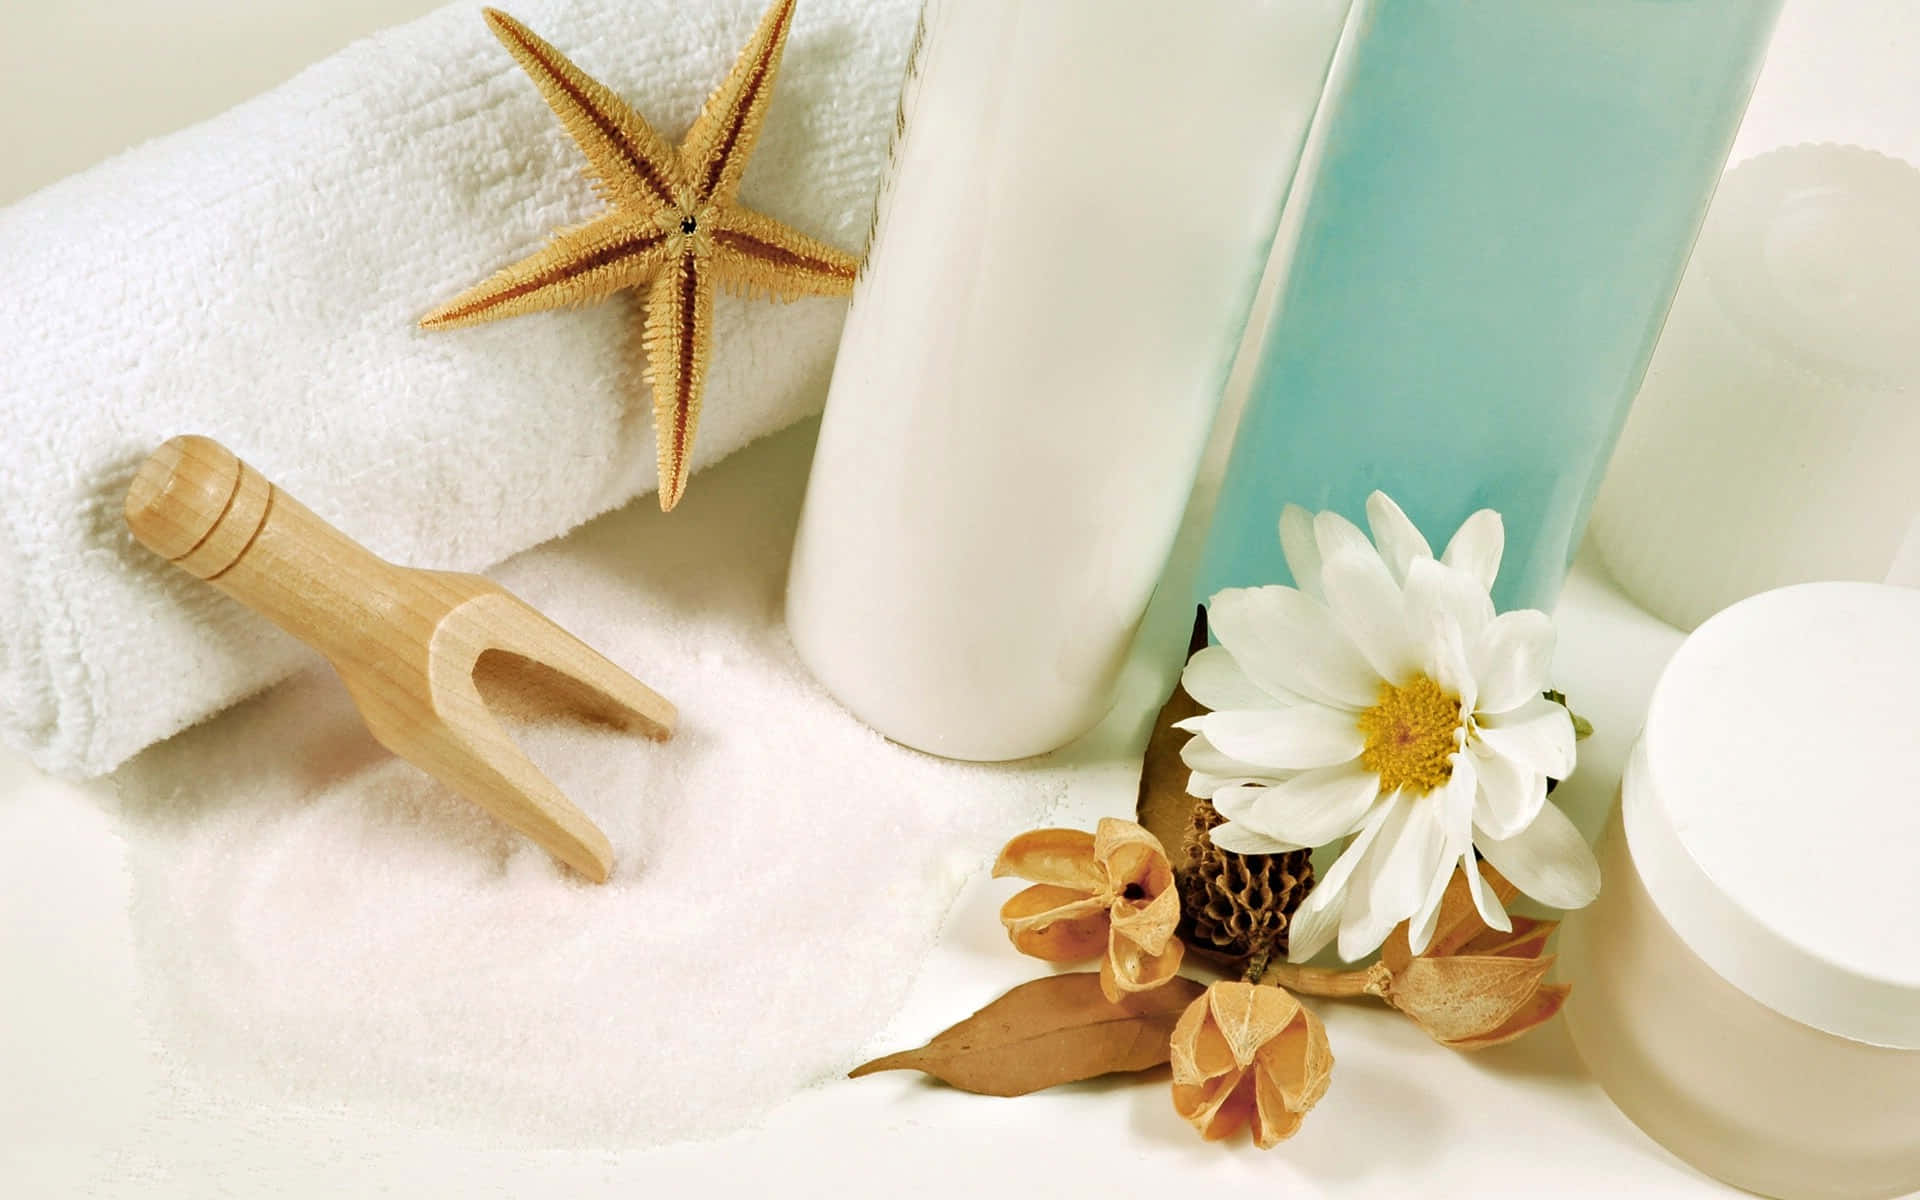 Take a Break from Life's Hectic Pace and Savor the Benefits of a Luxury Spa Treatment. Wallpaper